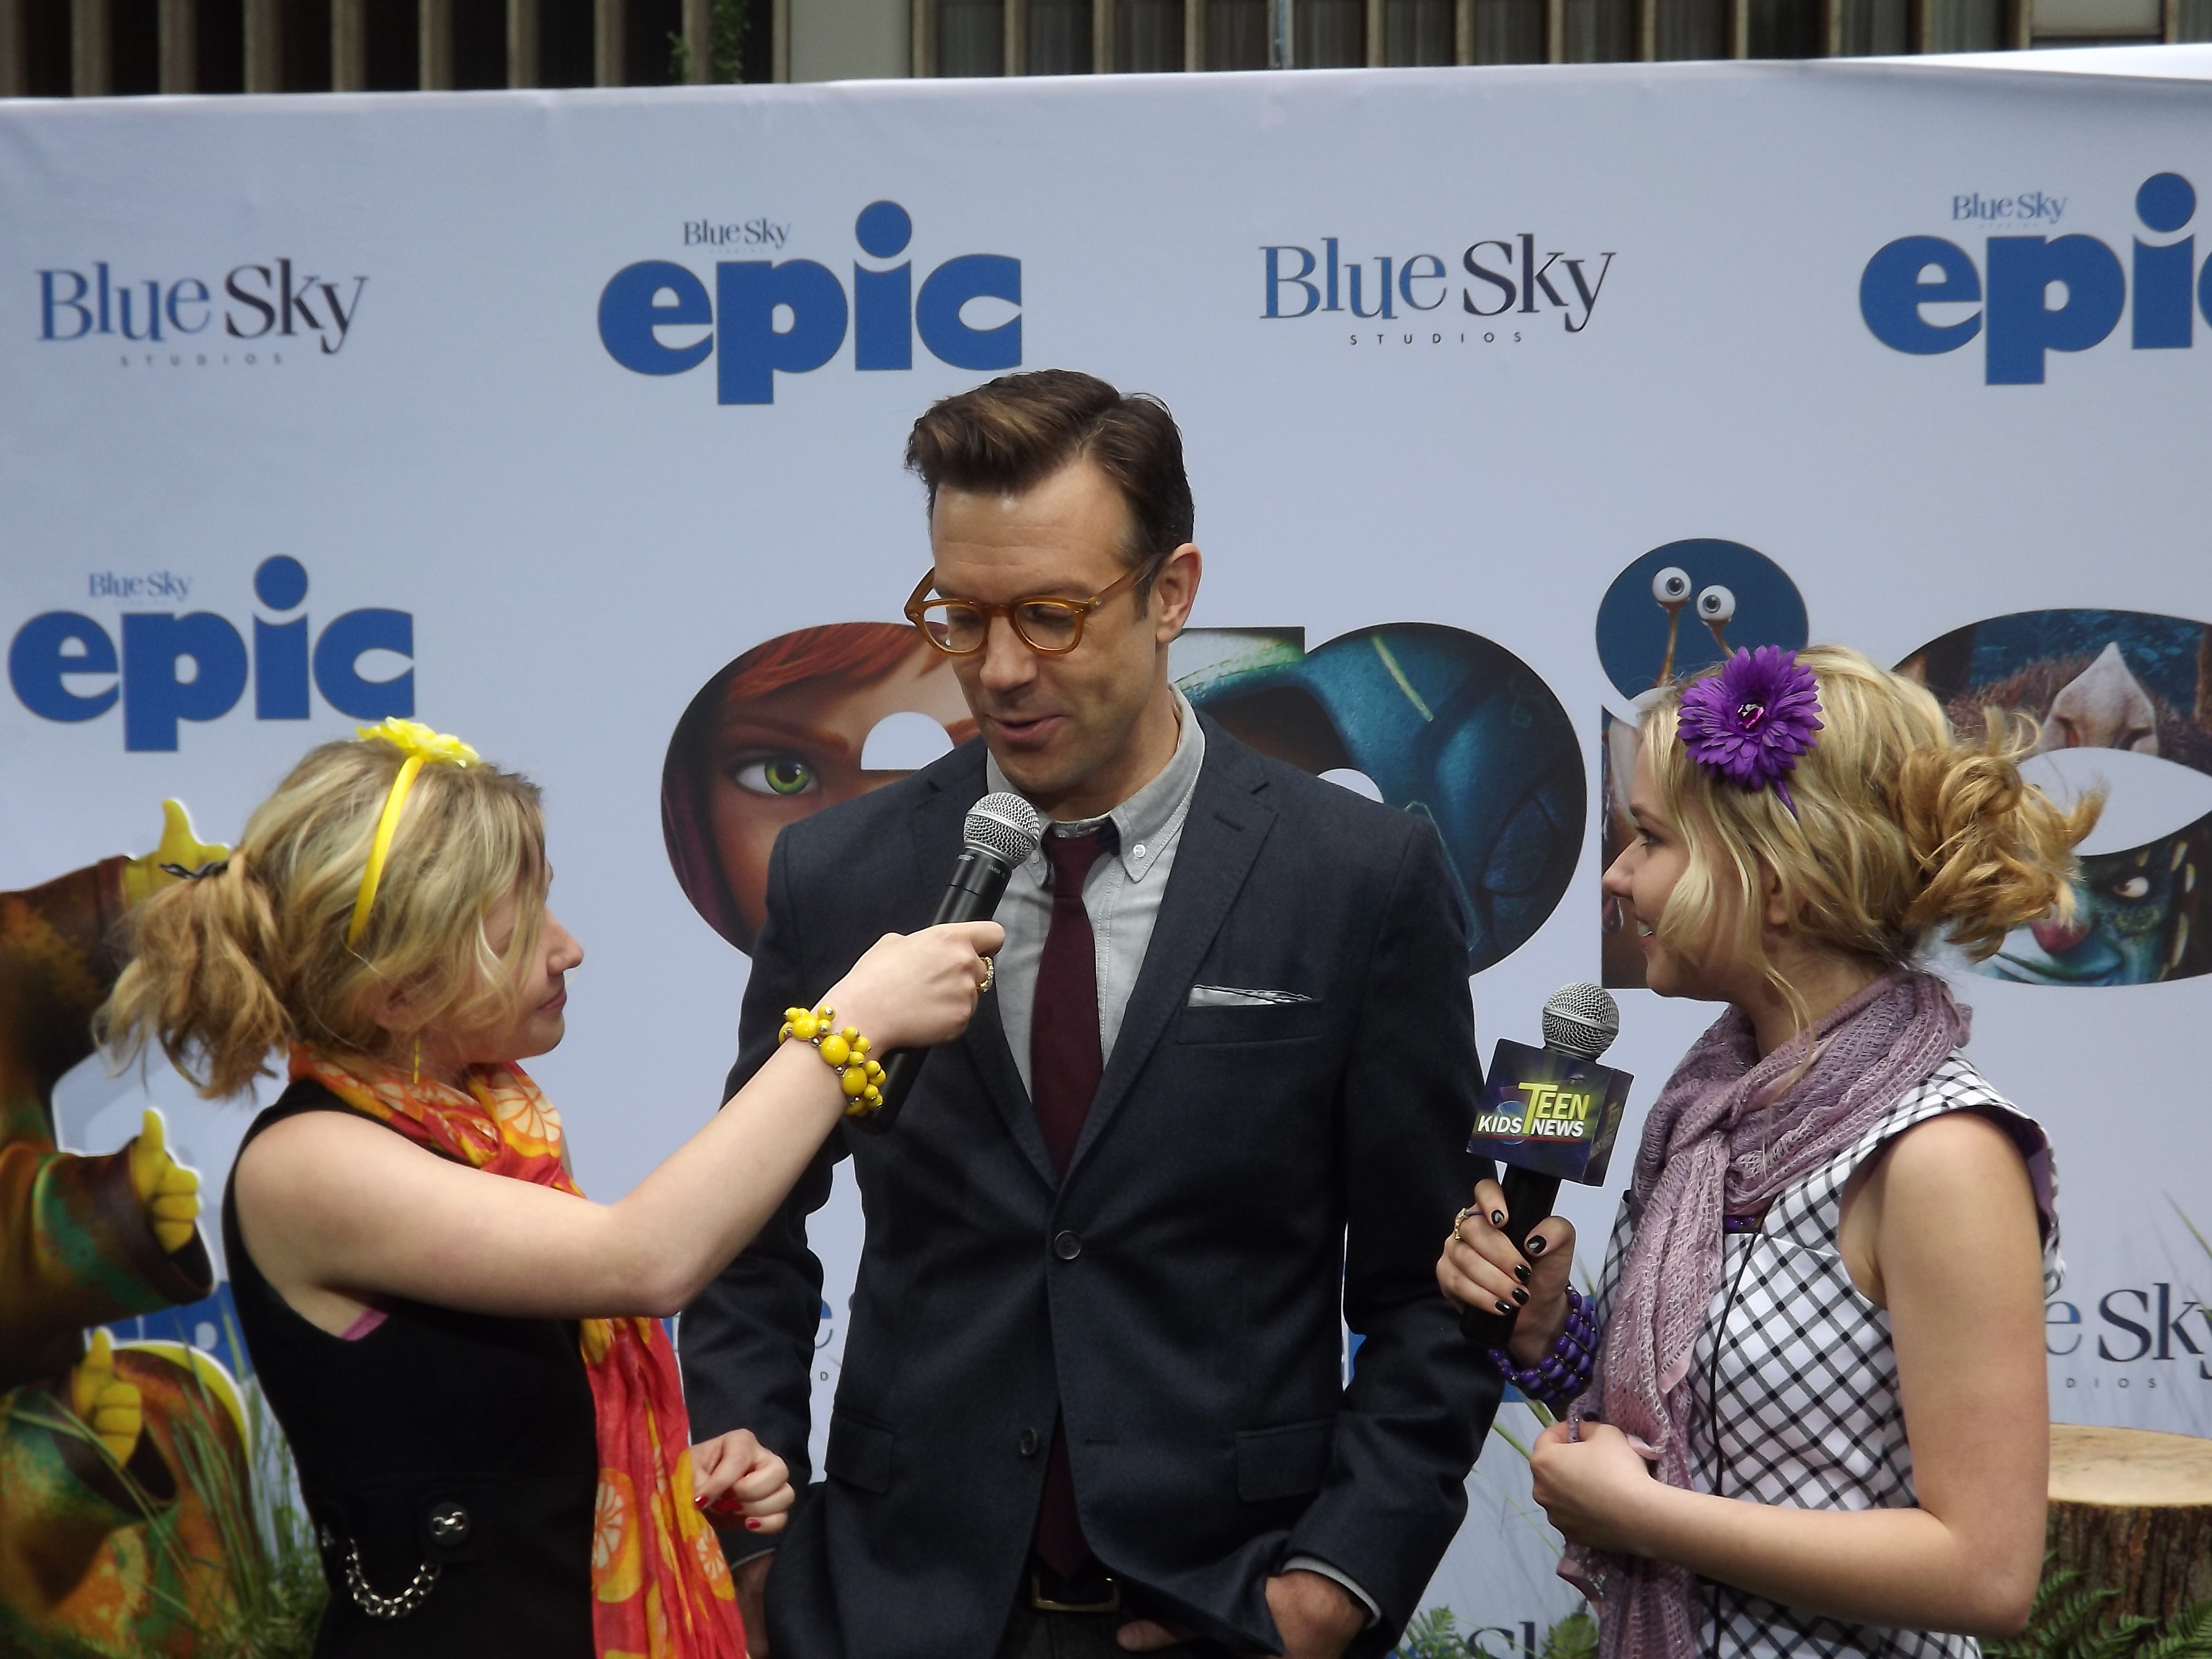 Hannah Loesch and her sister Cailin interviewing Jason Sudeikis at event of Epic